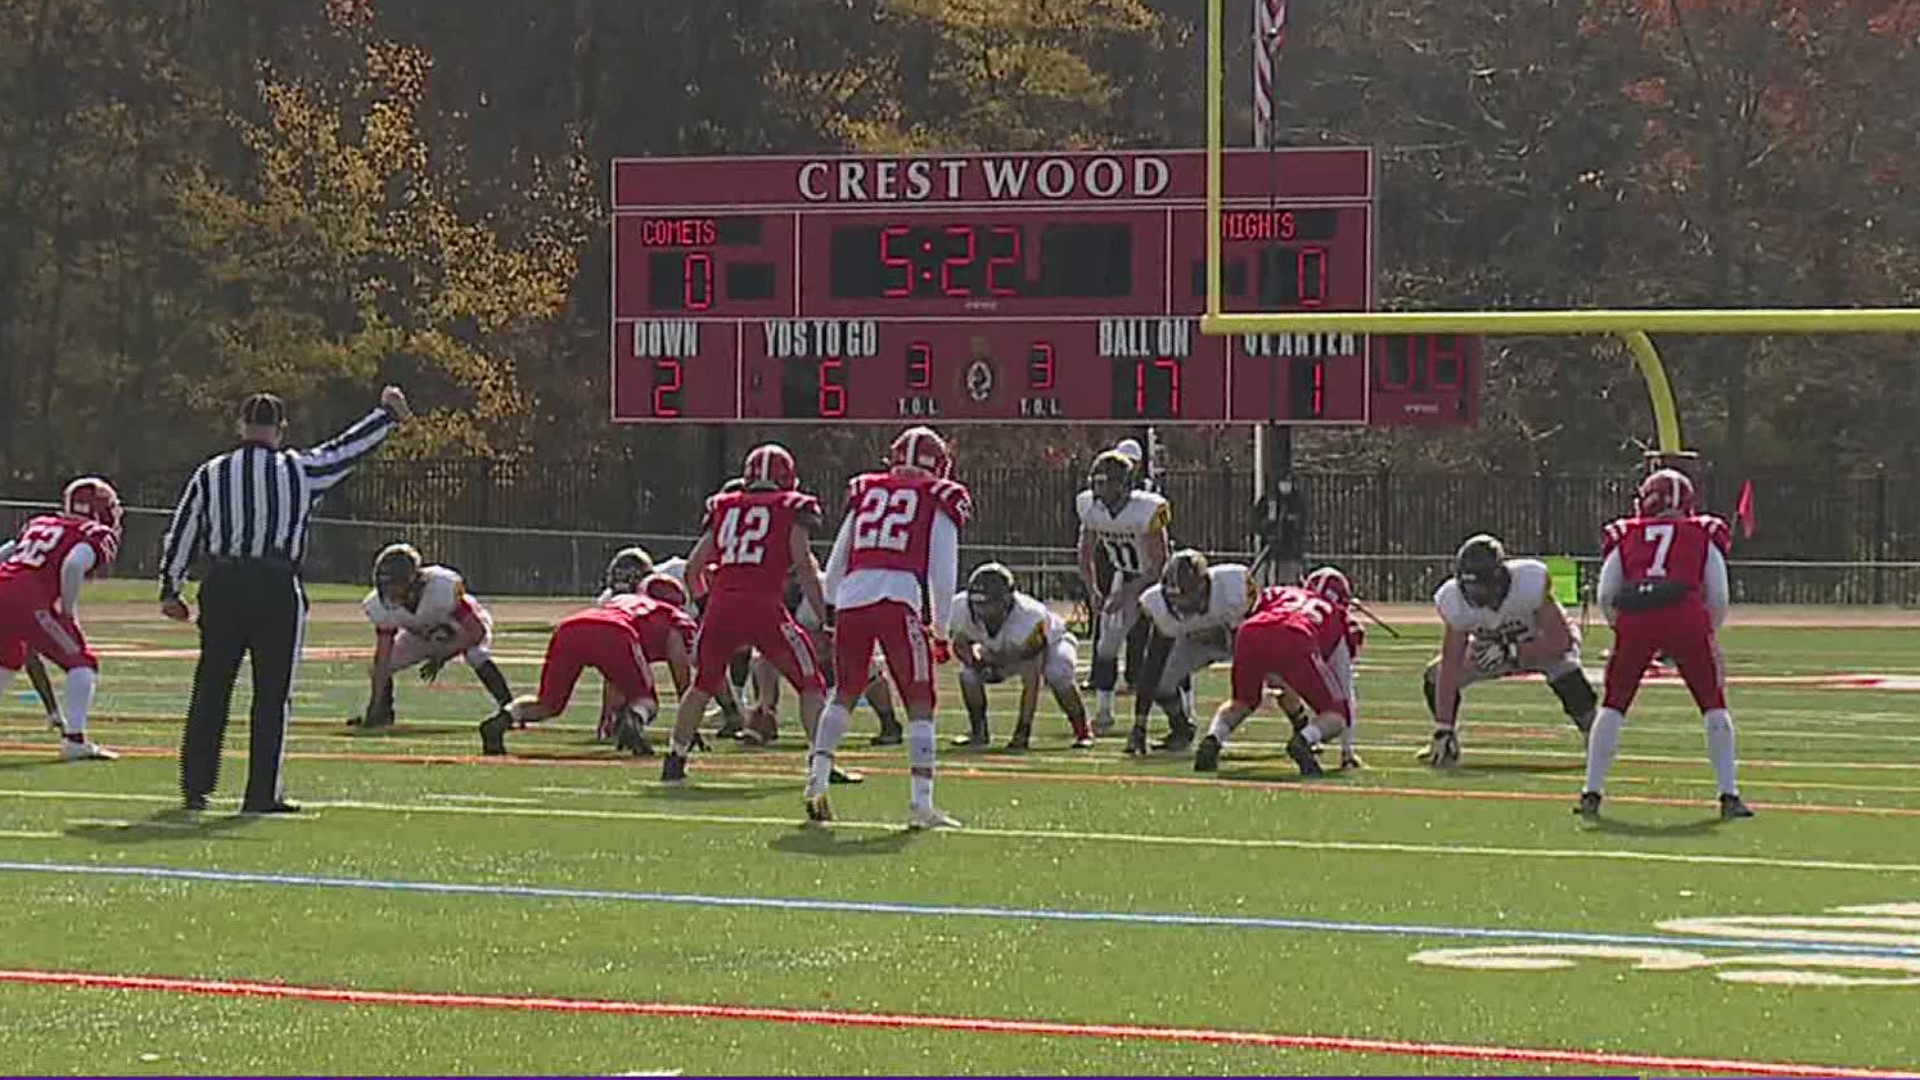 Highlights of Four HSFB games.  Crestwood rallies past Lake-Lehman in overtime.  Valley View over Prep, Danville and Montoursville with big wins